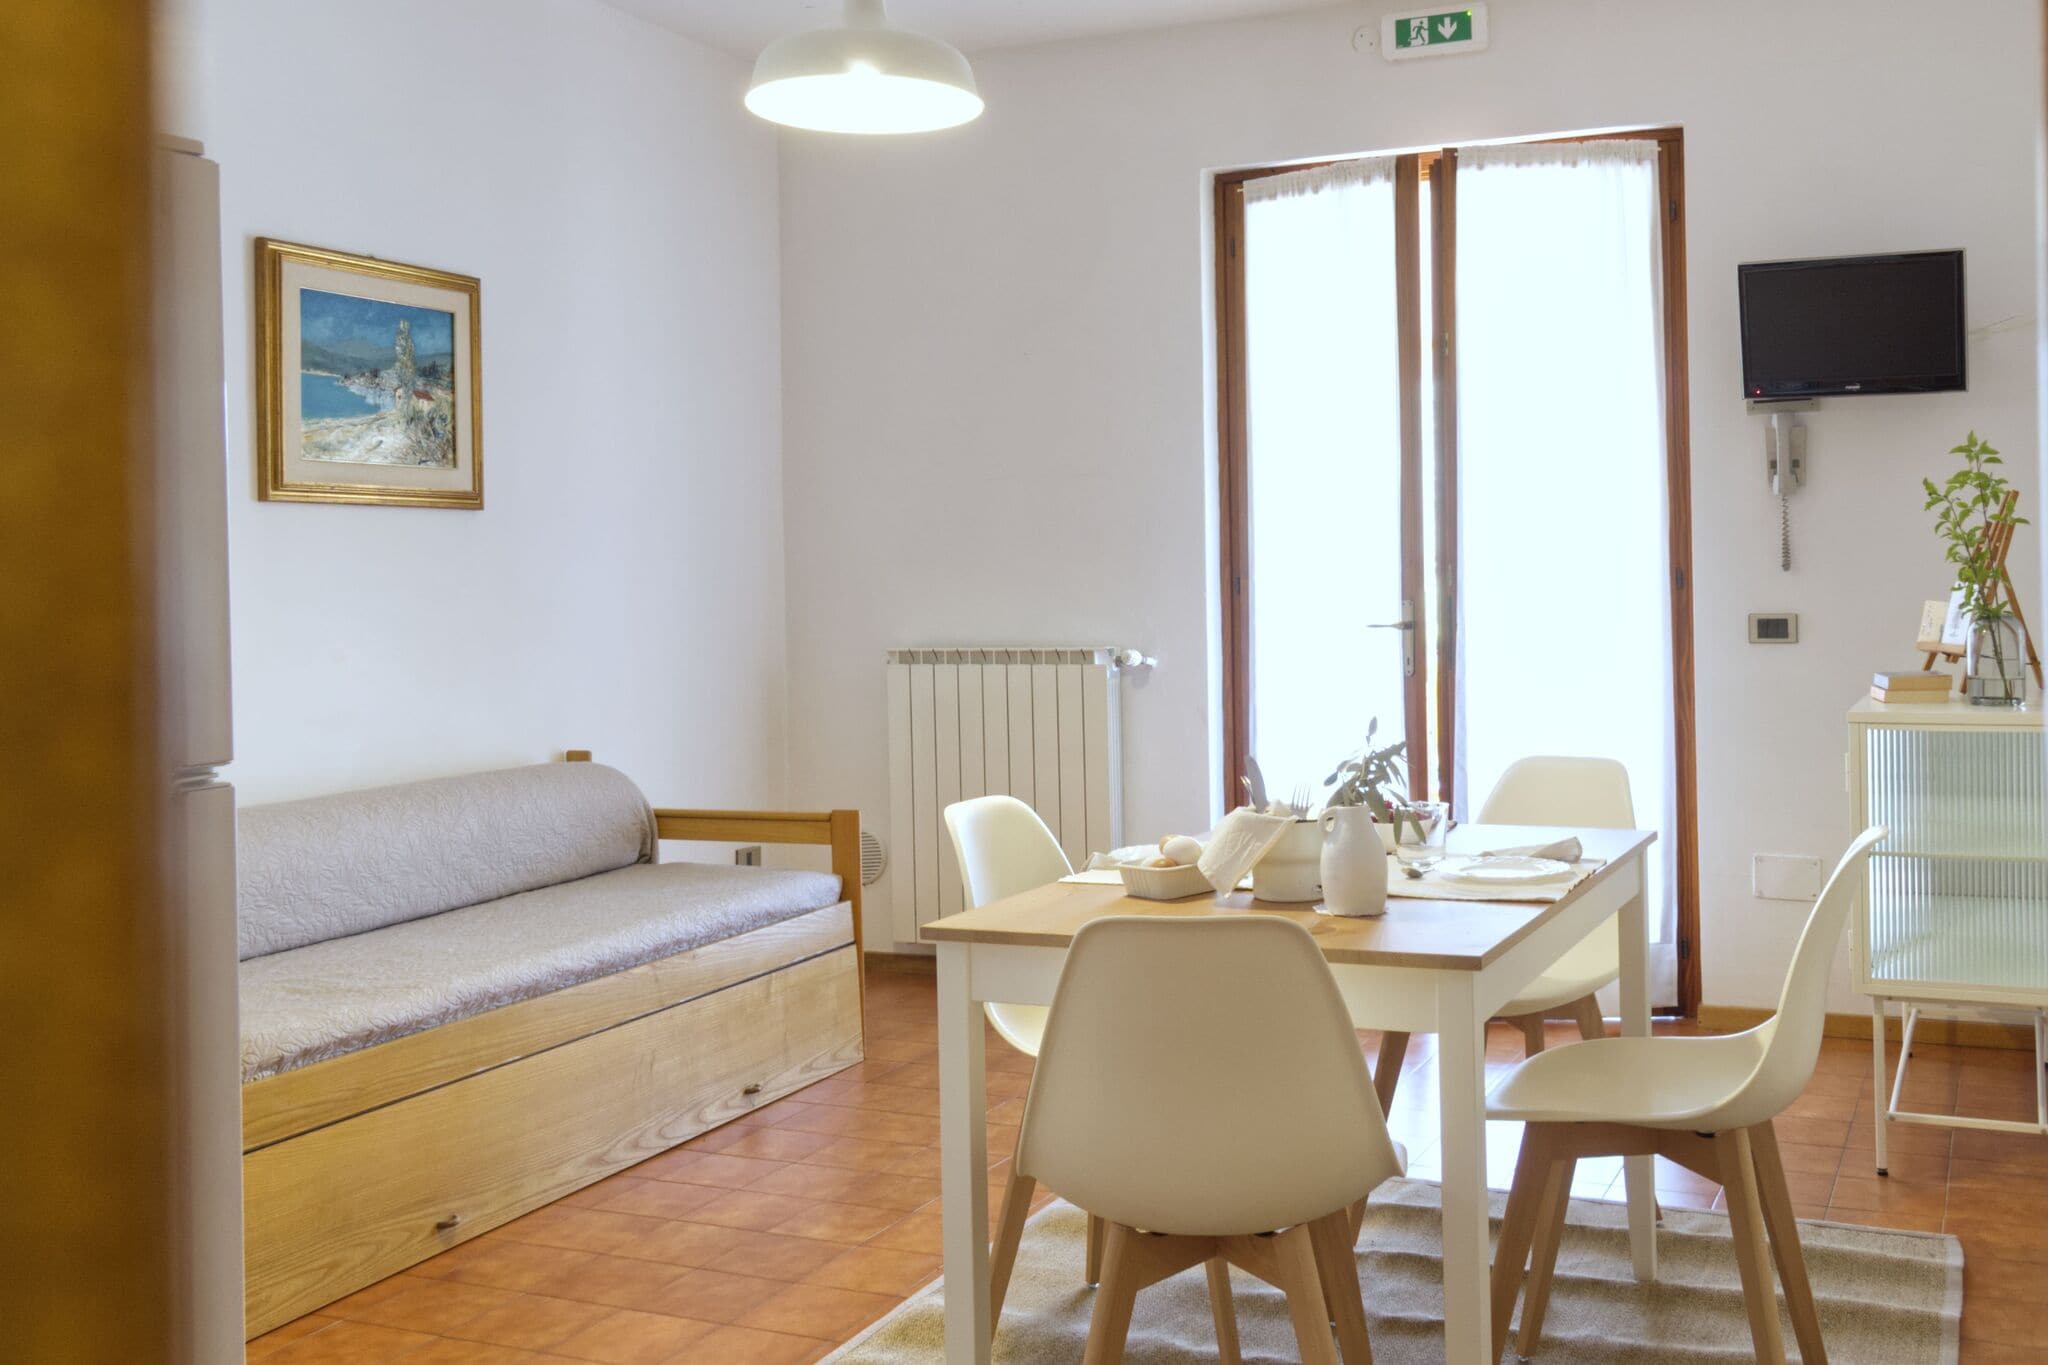 Comfortable flat with garden and swimming pool, only 1.5 km from Lake Garda